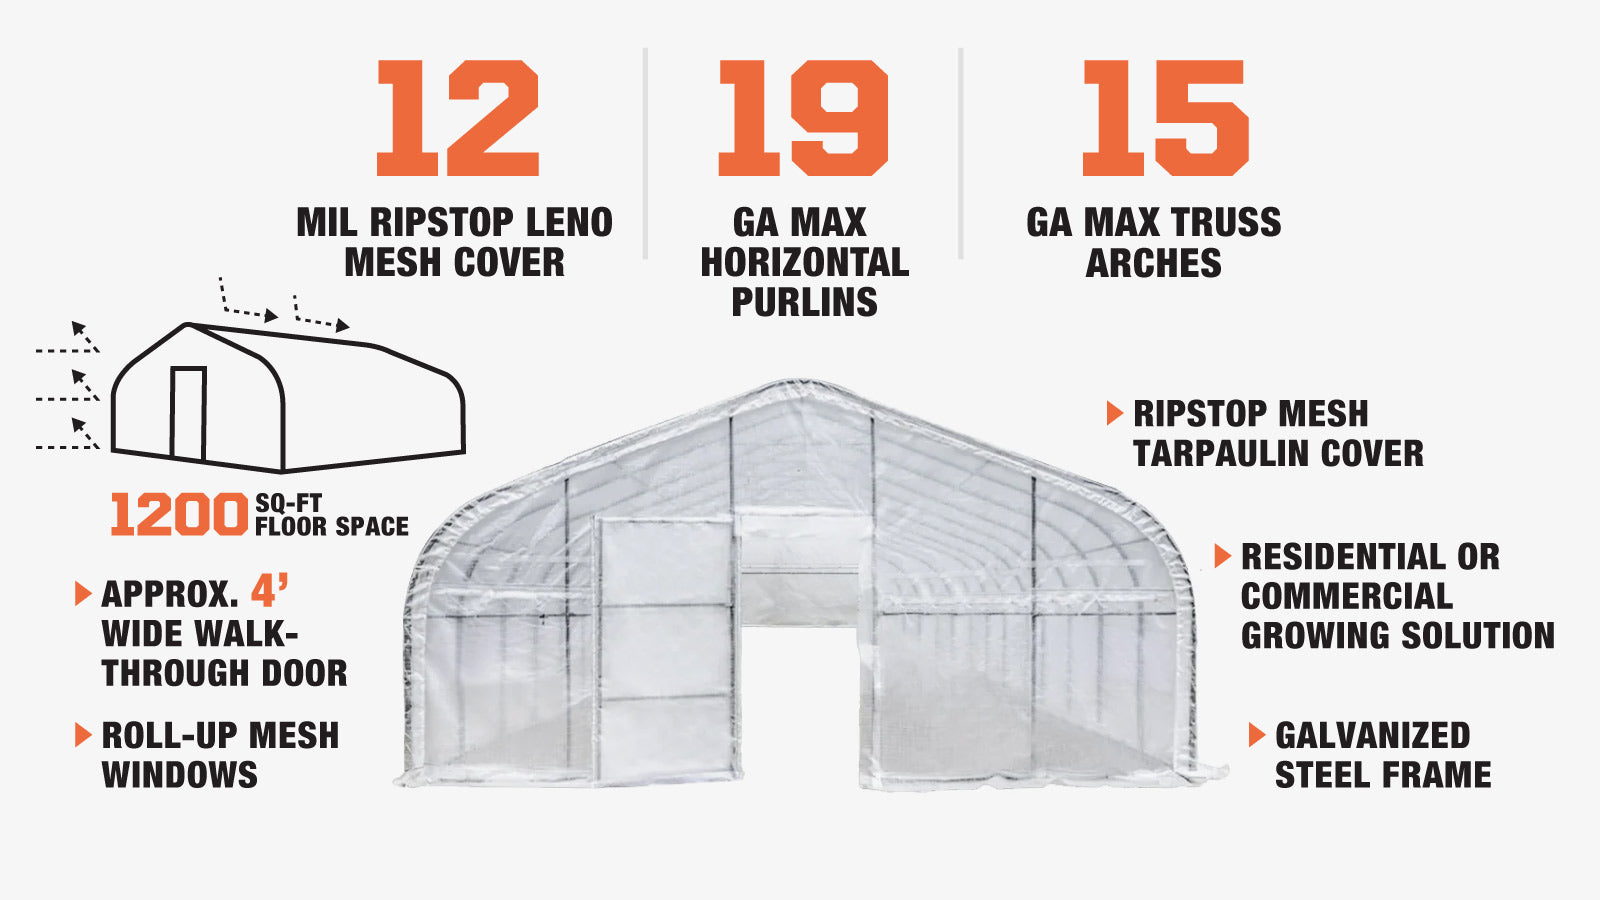 TMG Industrial 20' x 60' Tunnel Greenhouse Grow Tent with 12 Mil Ripstop Leno Mesh Cover, Cold Frame, Roll-up Windows, Peak Ceiling Roof, TMG-GH2060-description-image